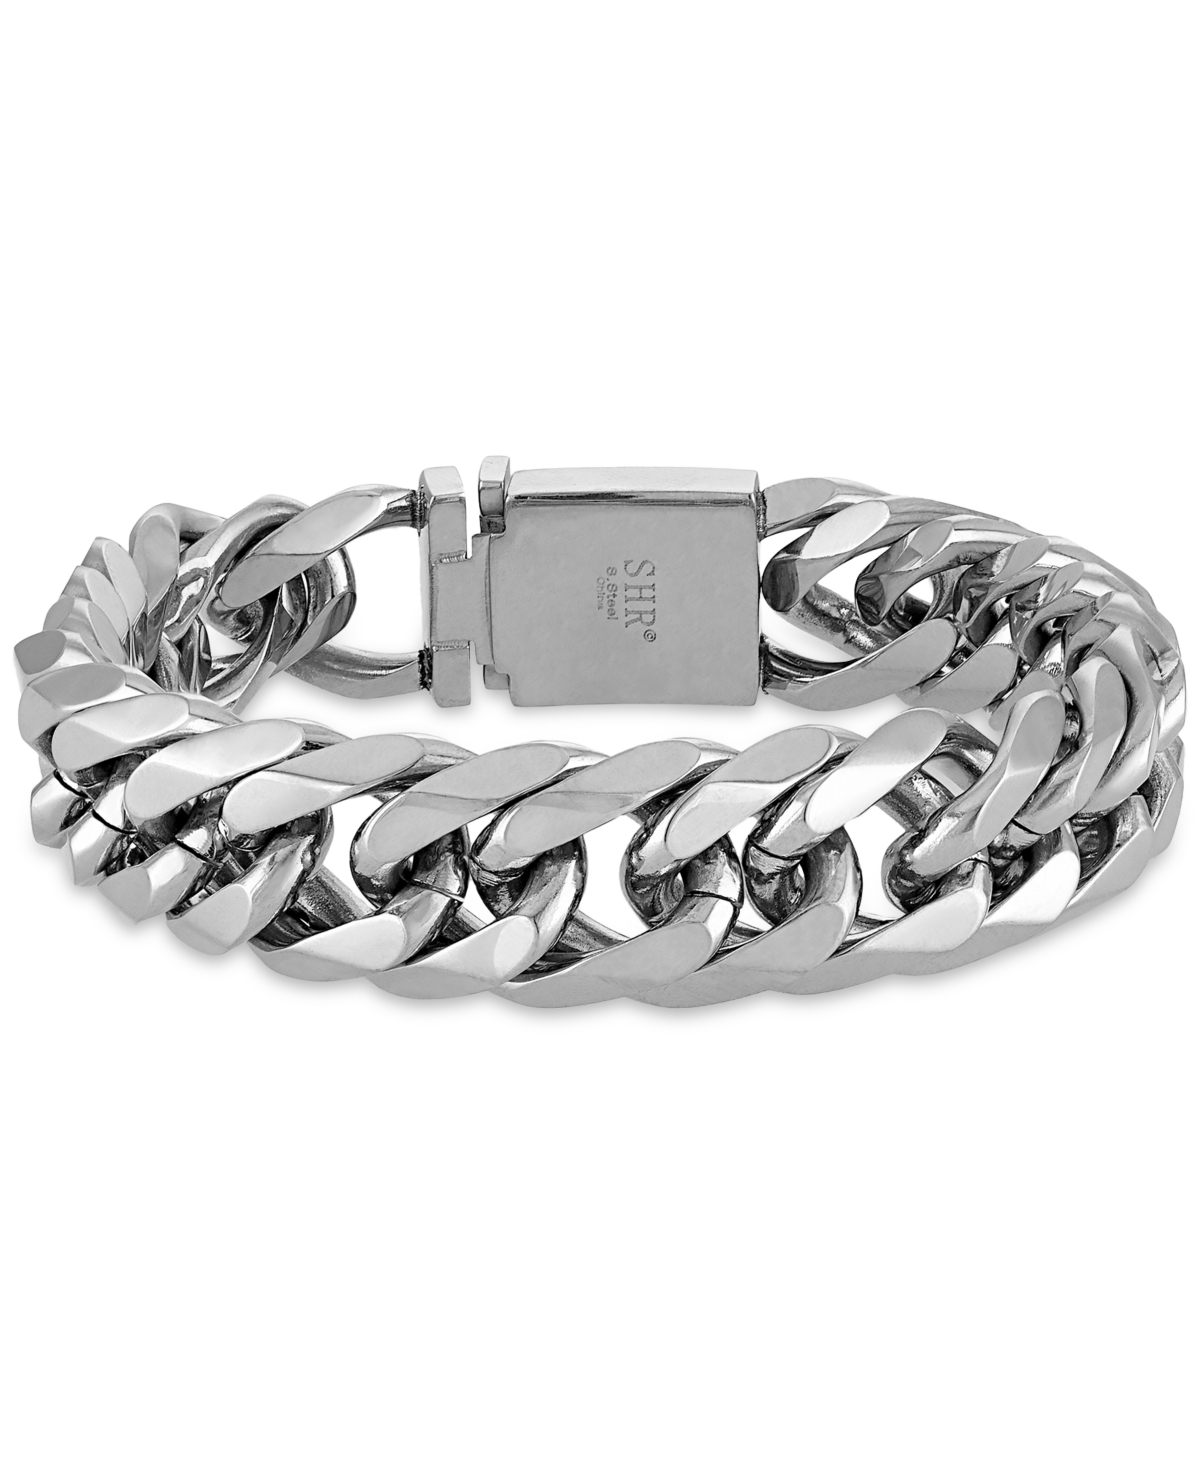 Shop Esquire Men's Jewelry Polished Wide Curb Link Bracelet In Stainless Steel, Created For Macy's